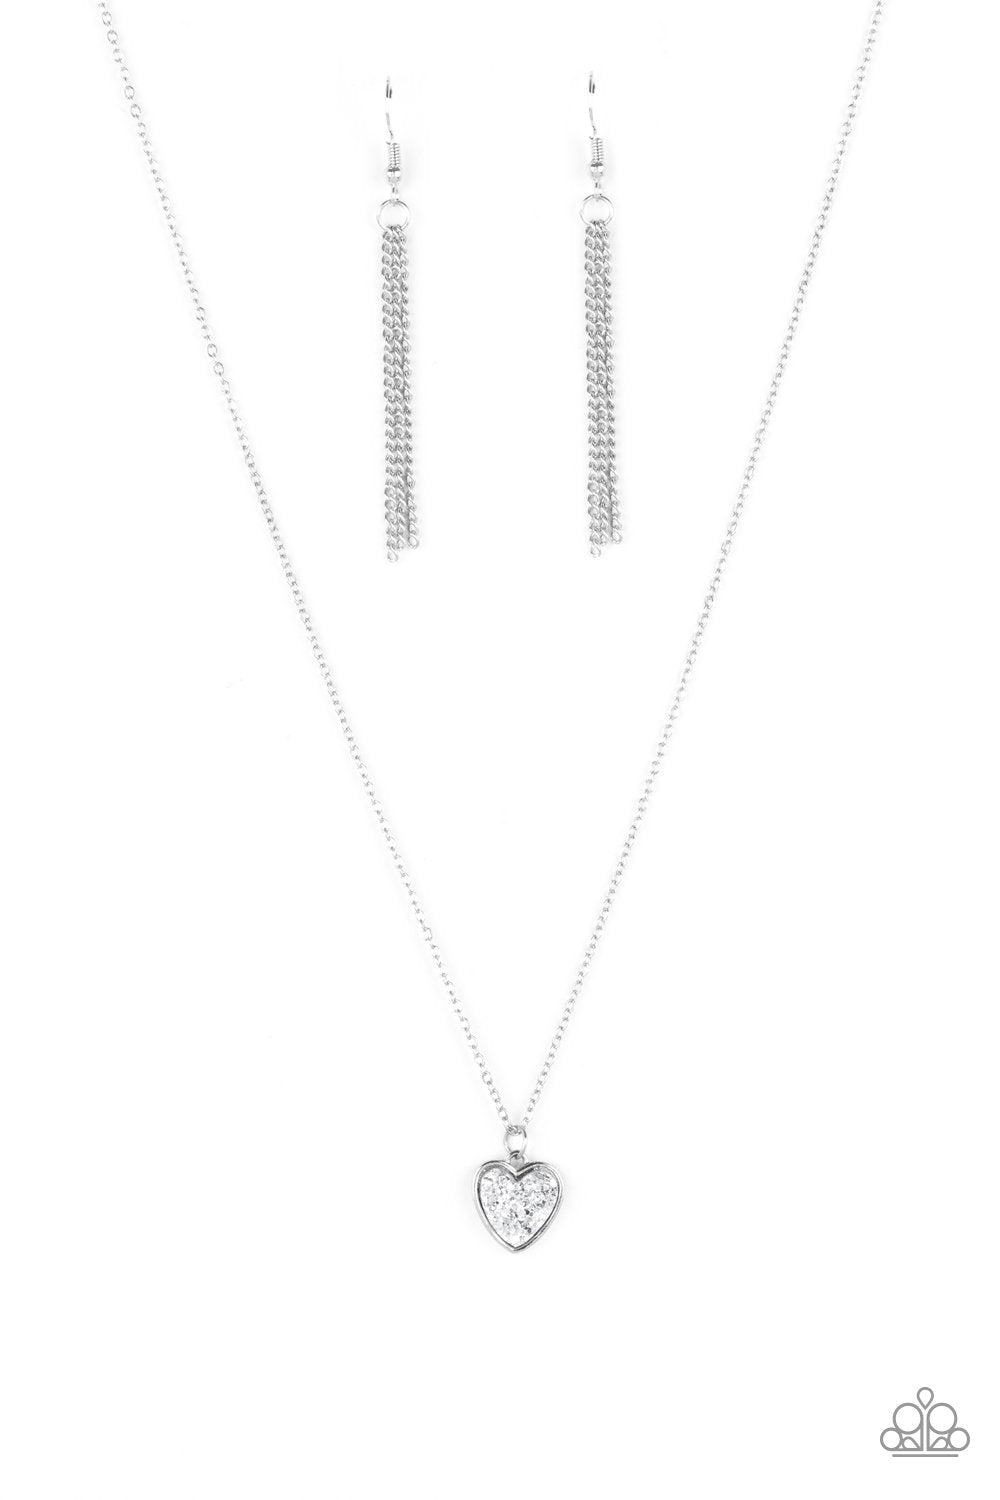 Pitter-Patter, Goes My Heart Silver Heart Necklace - Paparazzi Accessories- lightbox - CarasShop.com - $5 Jewelry by Cara Jewels